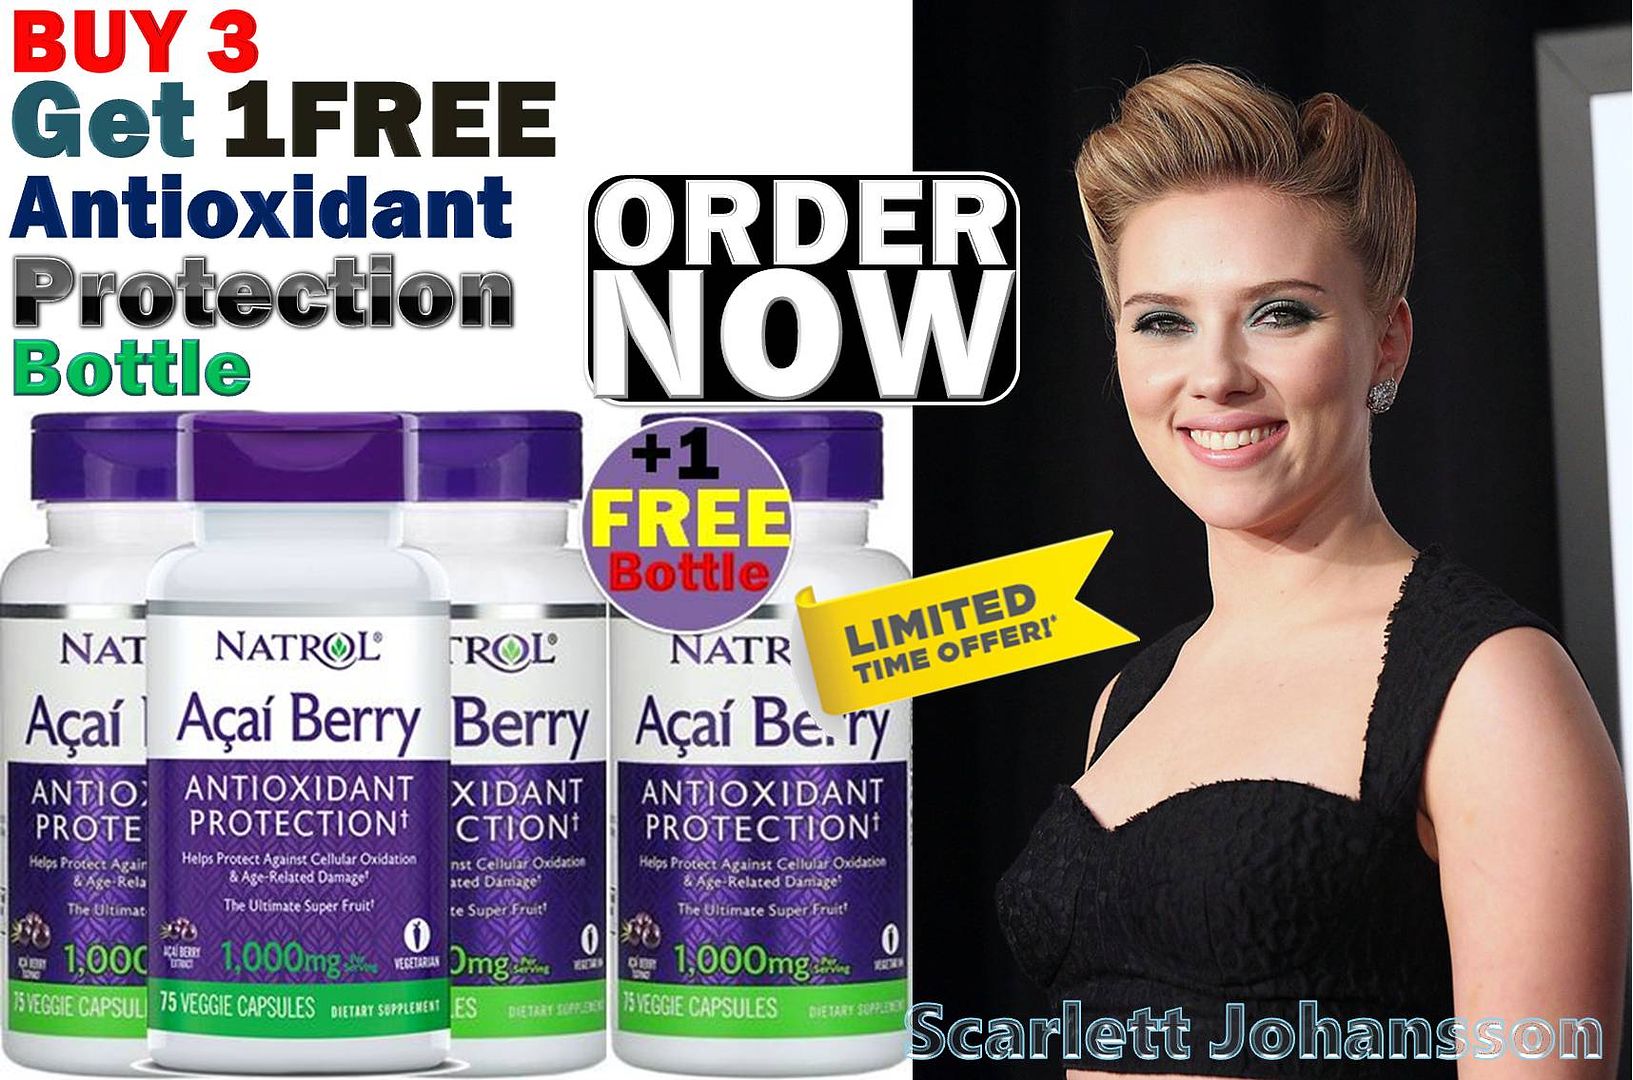 Antioxidant Protection by Natrol